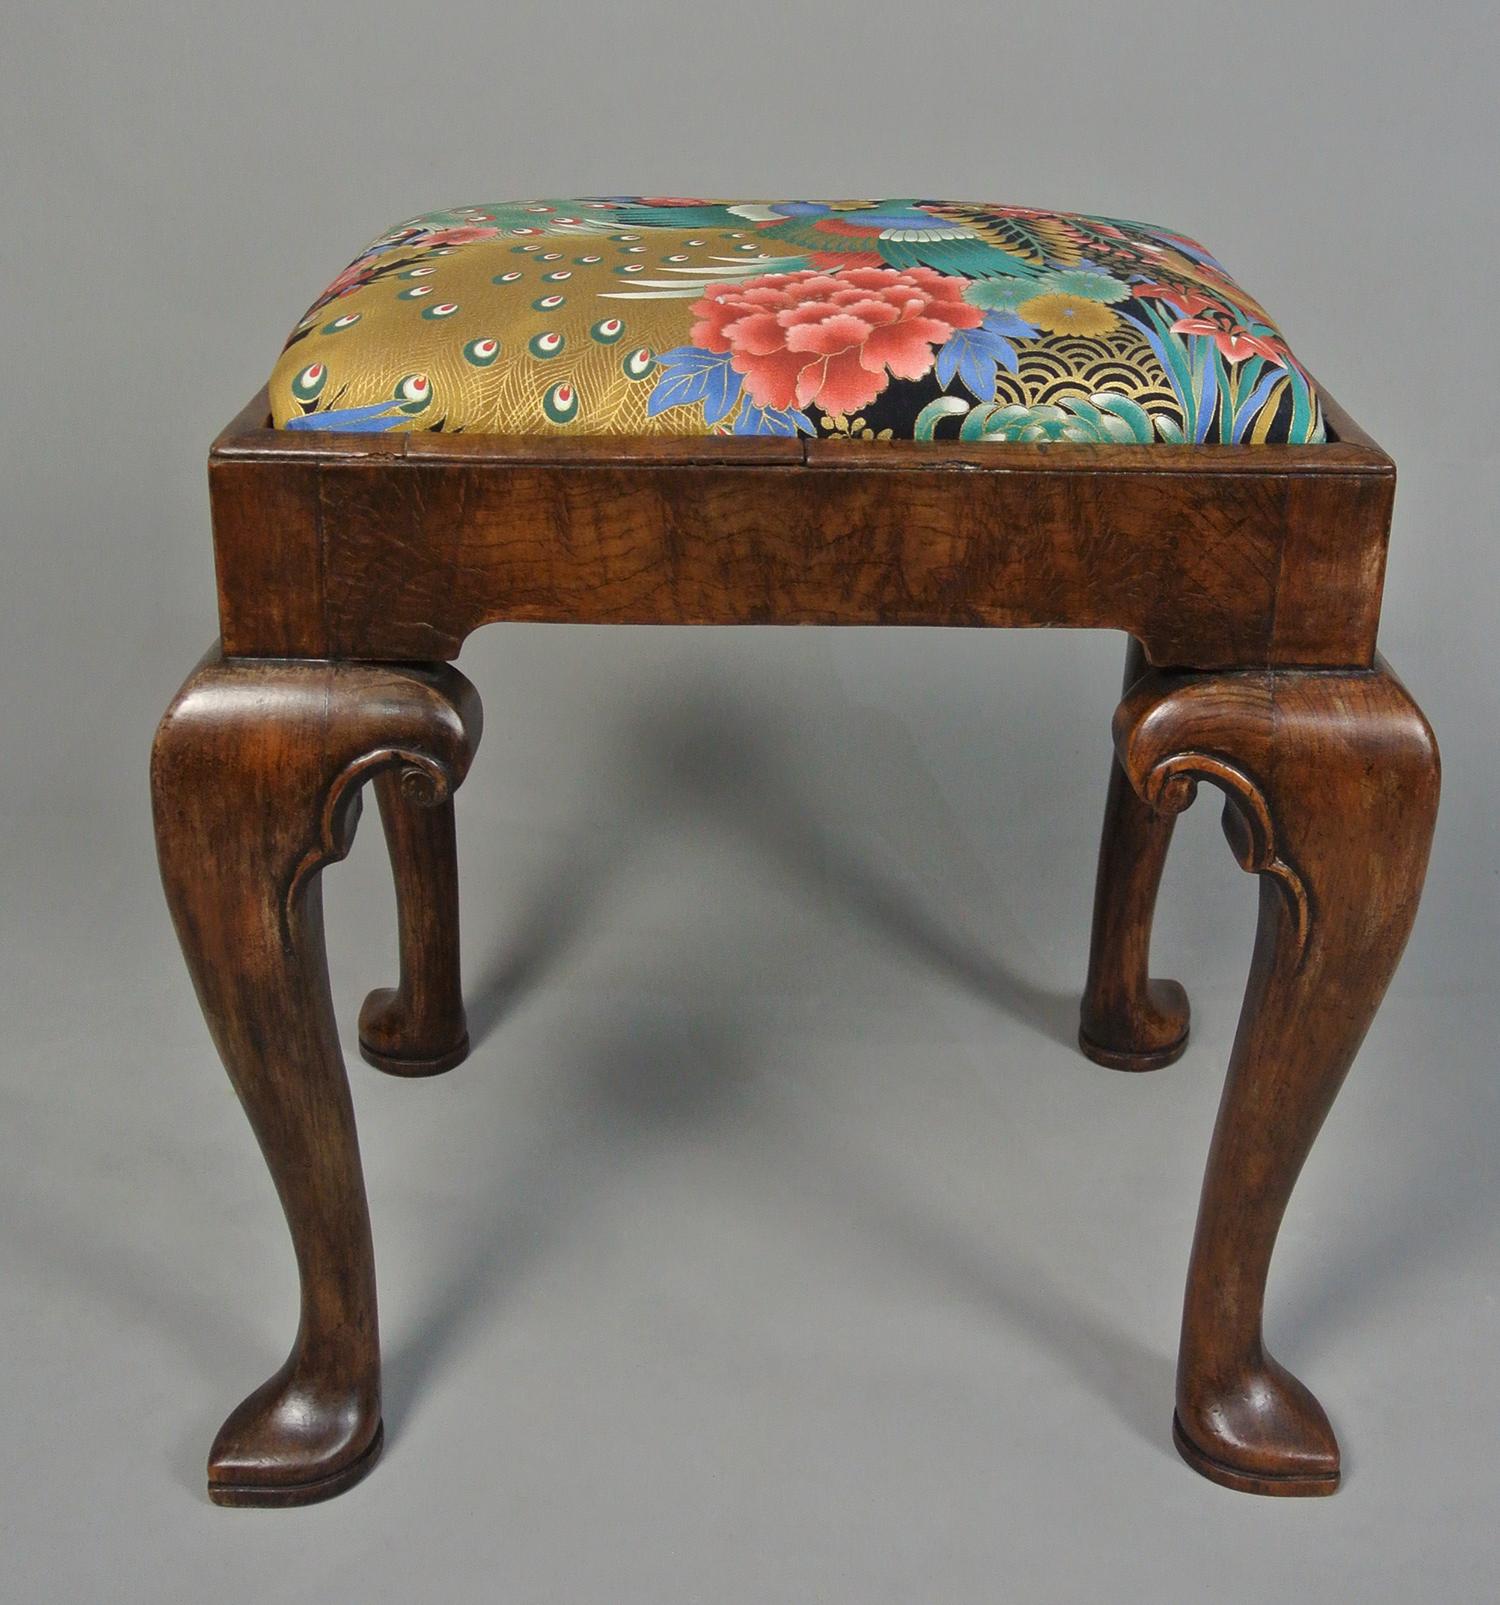 Tall and Handsome George II Walnut Stool with Slipper Feet c. 1750 In Good Condition For Sale In Heathfield, GB